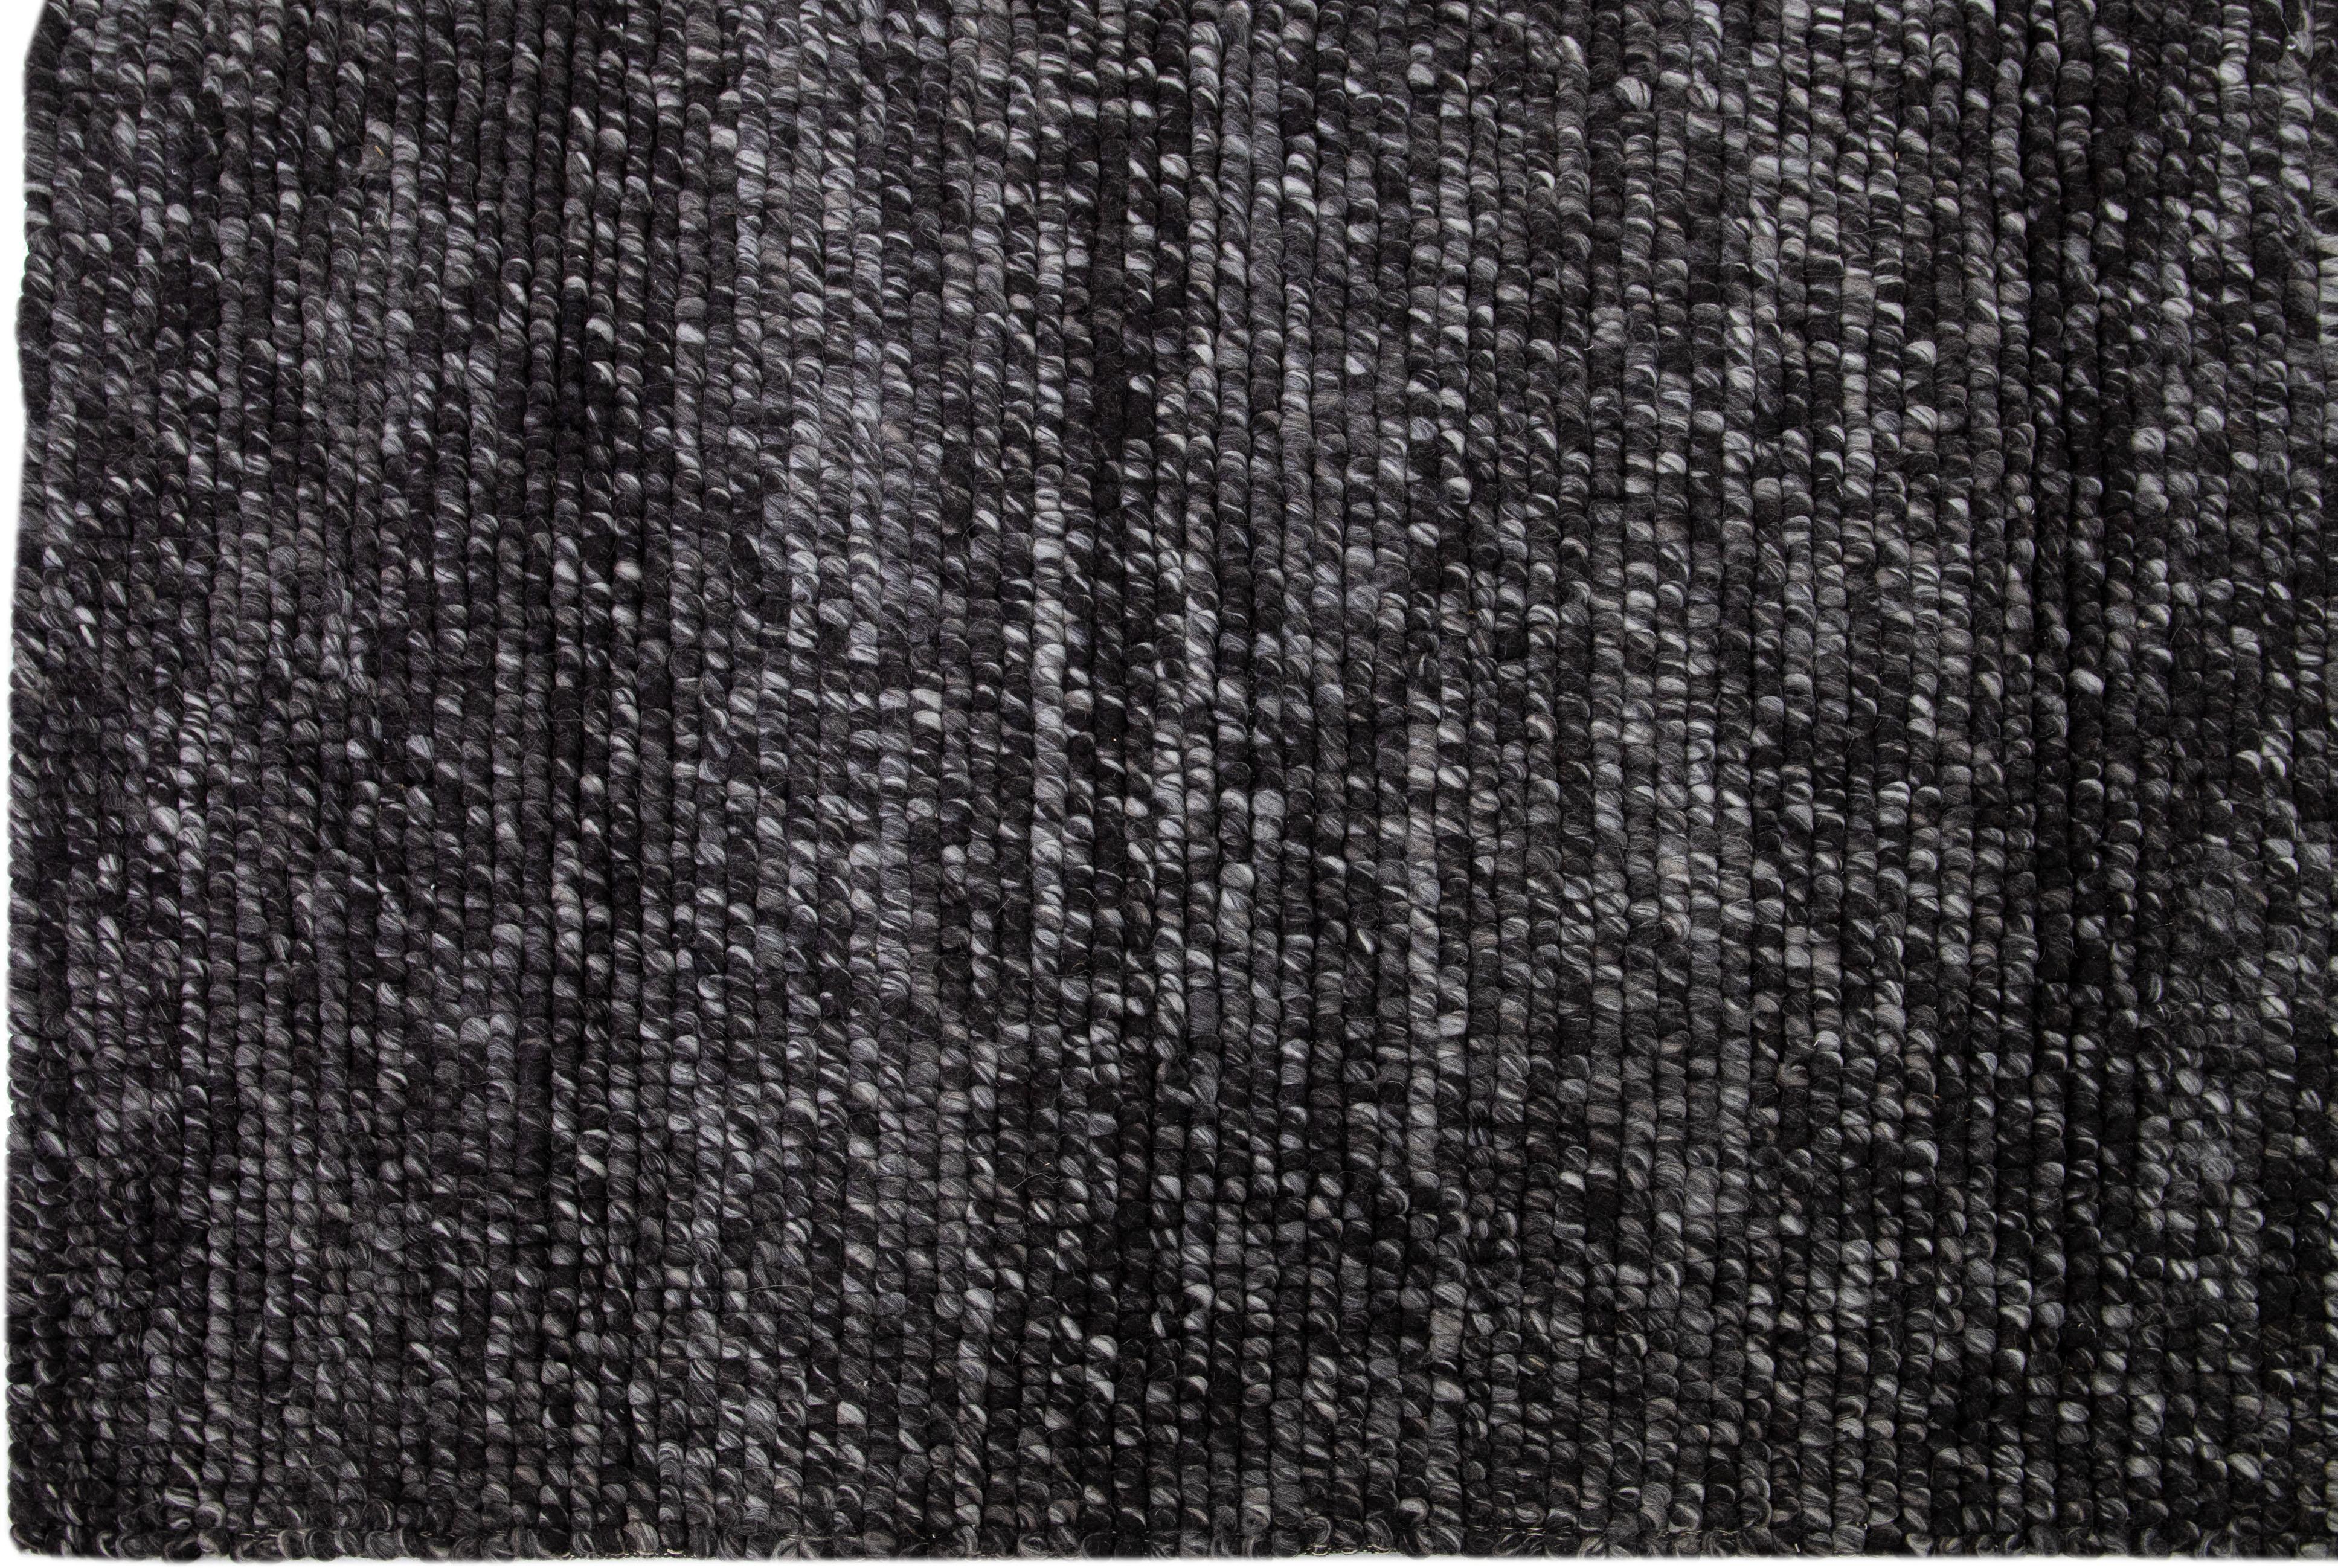 Hand-Woven Gray-Charcoal Color Modern Felted Textuted Wool Rug by Apadana For Sale